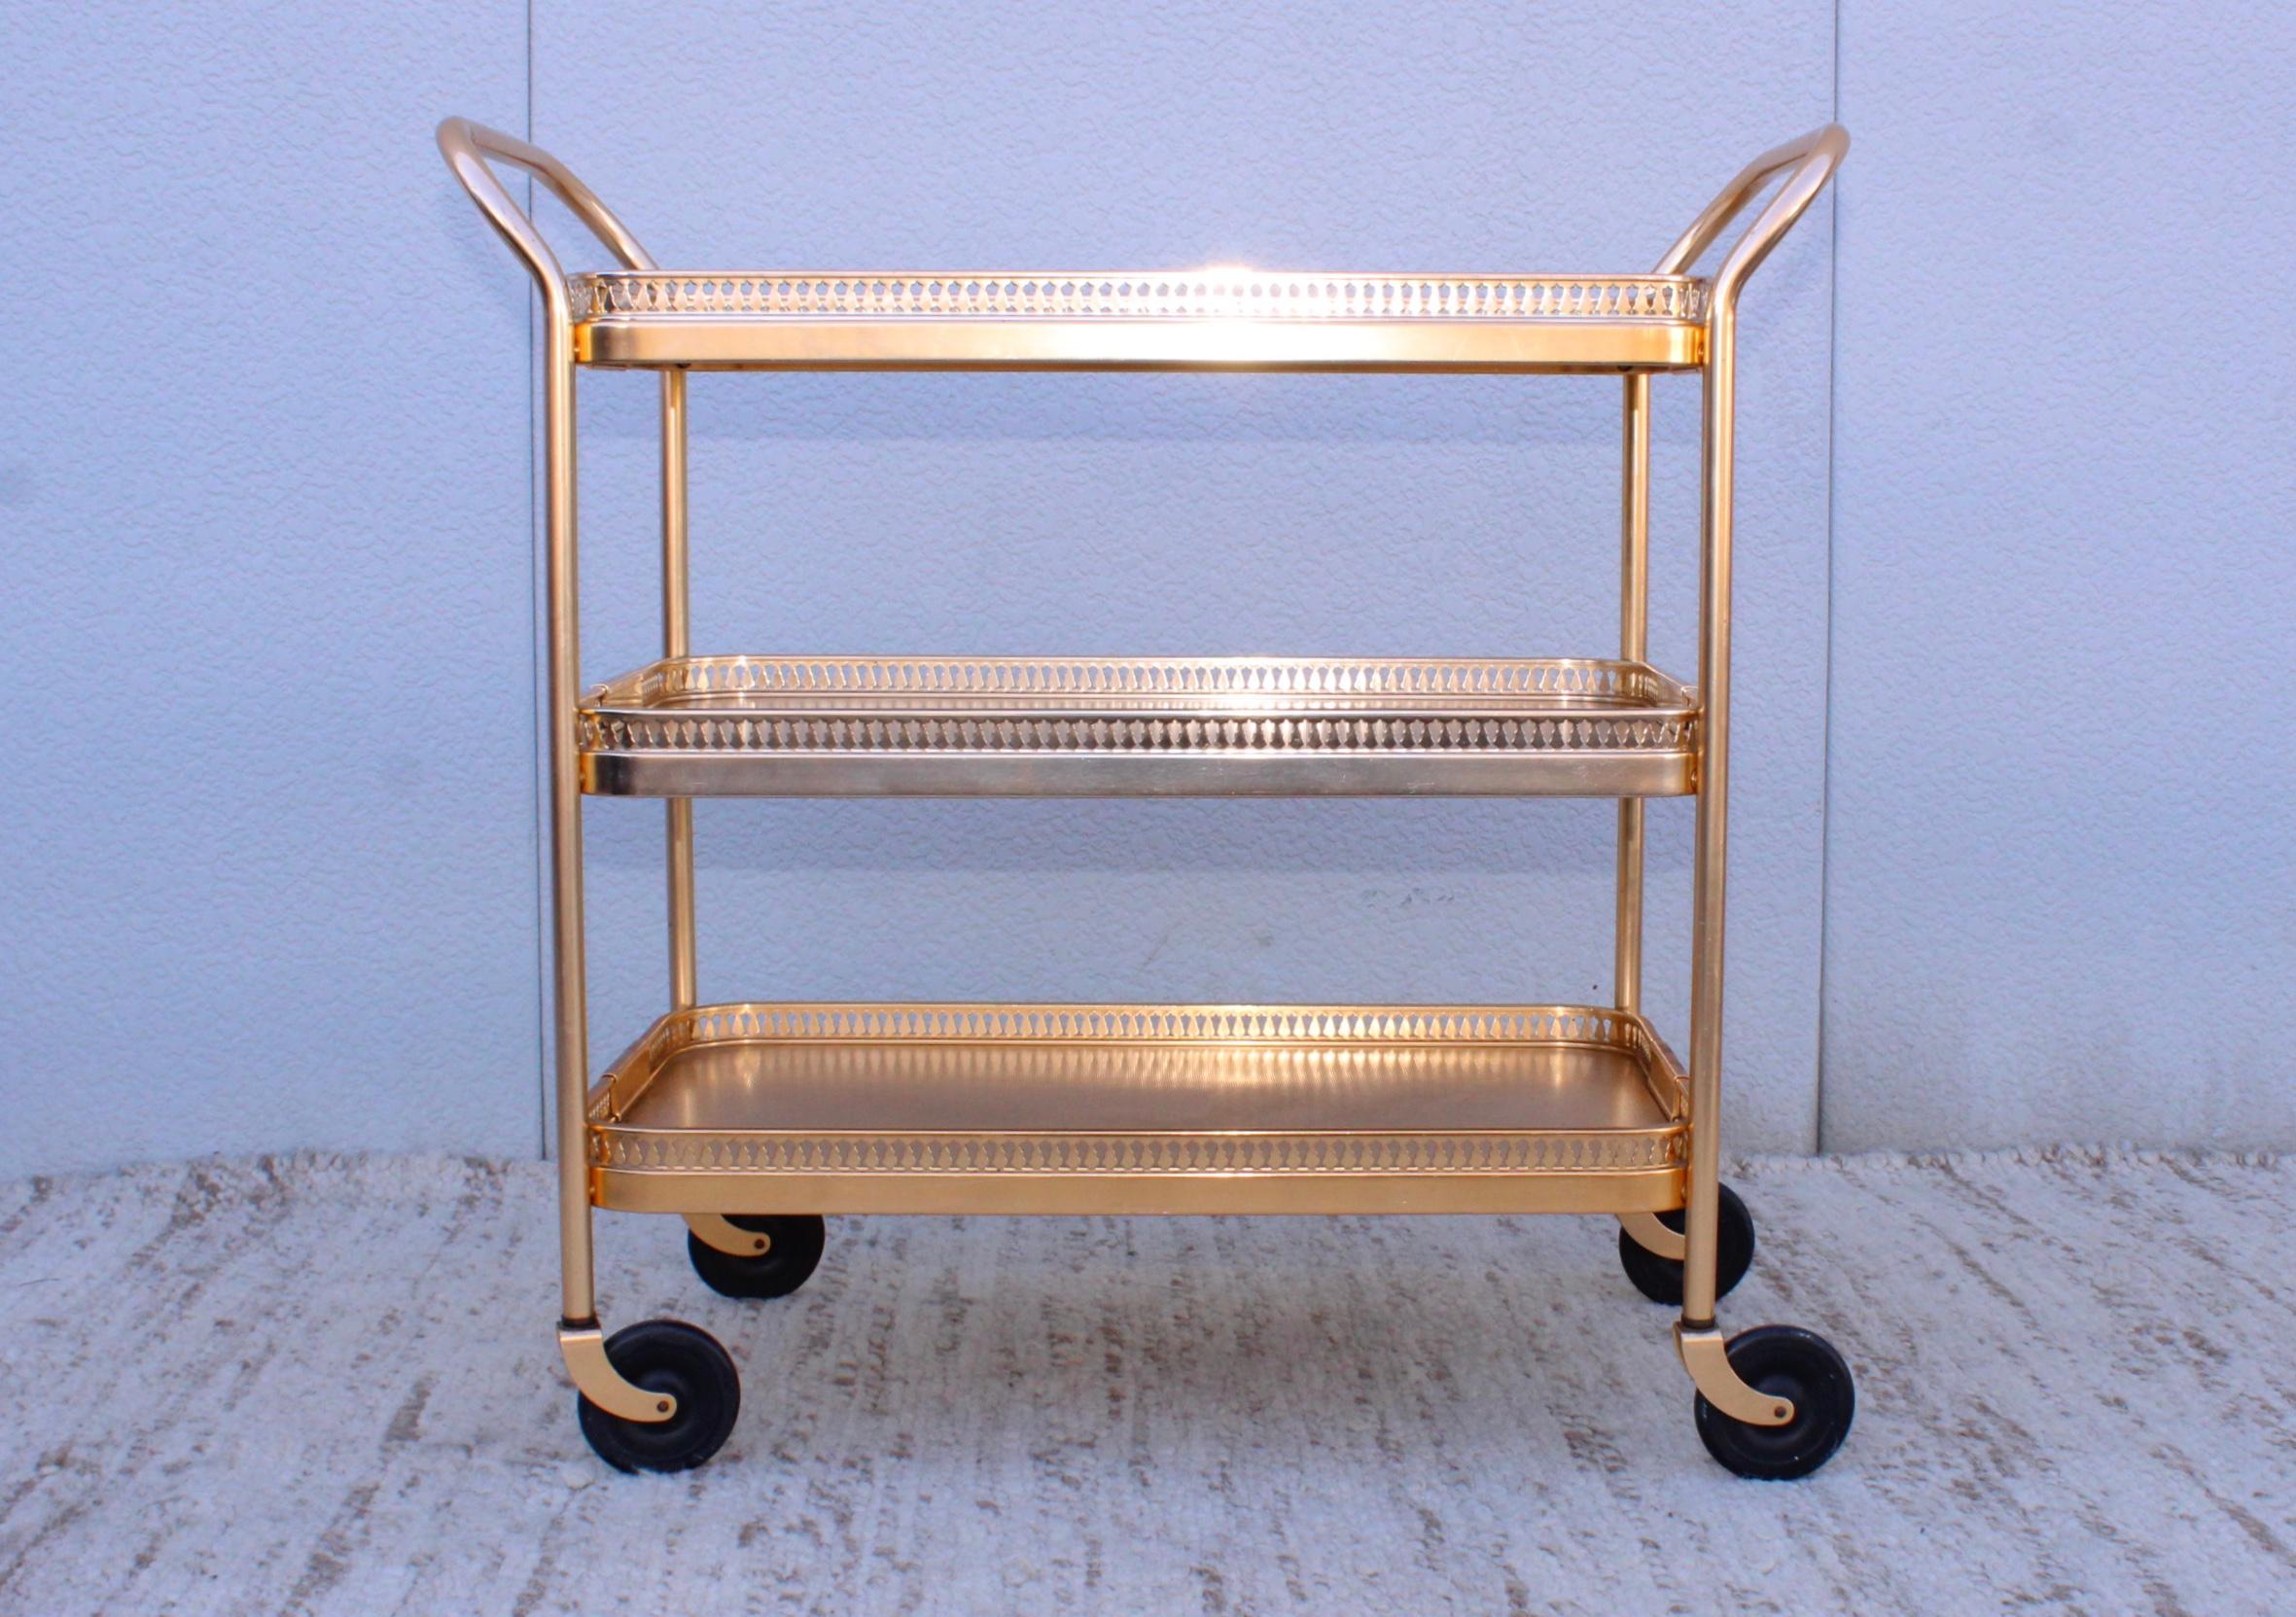 Aluminum 1960's Mid-Century Modern 3 Tier Bar Cart from England by Kaymet